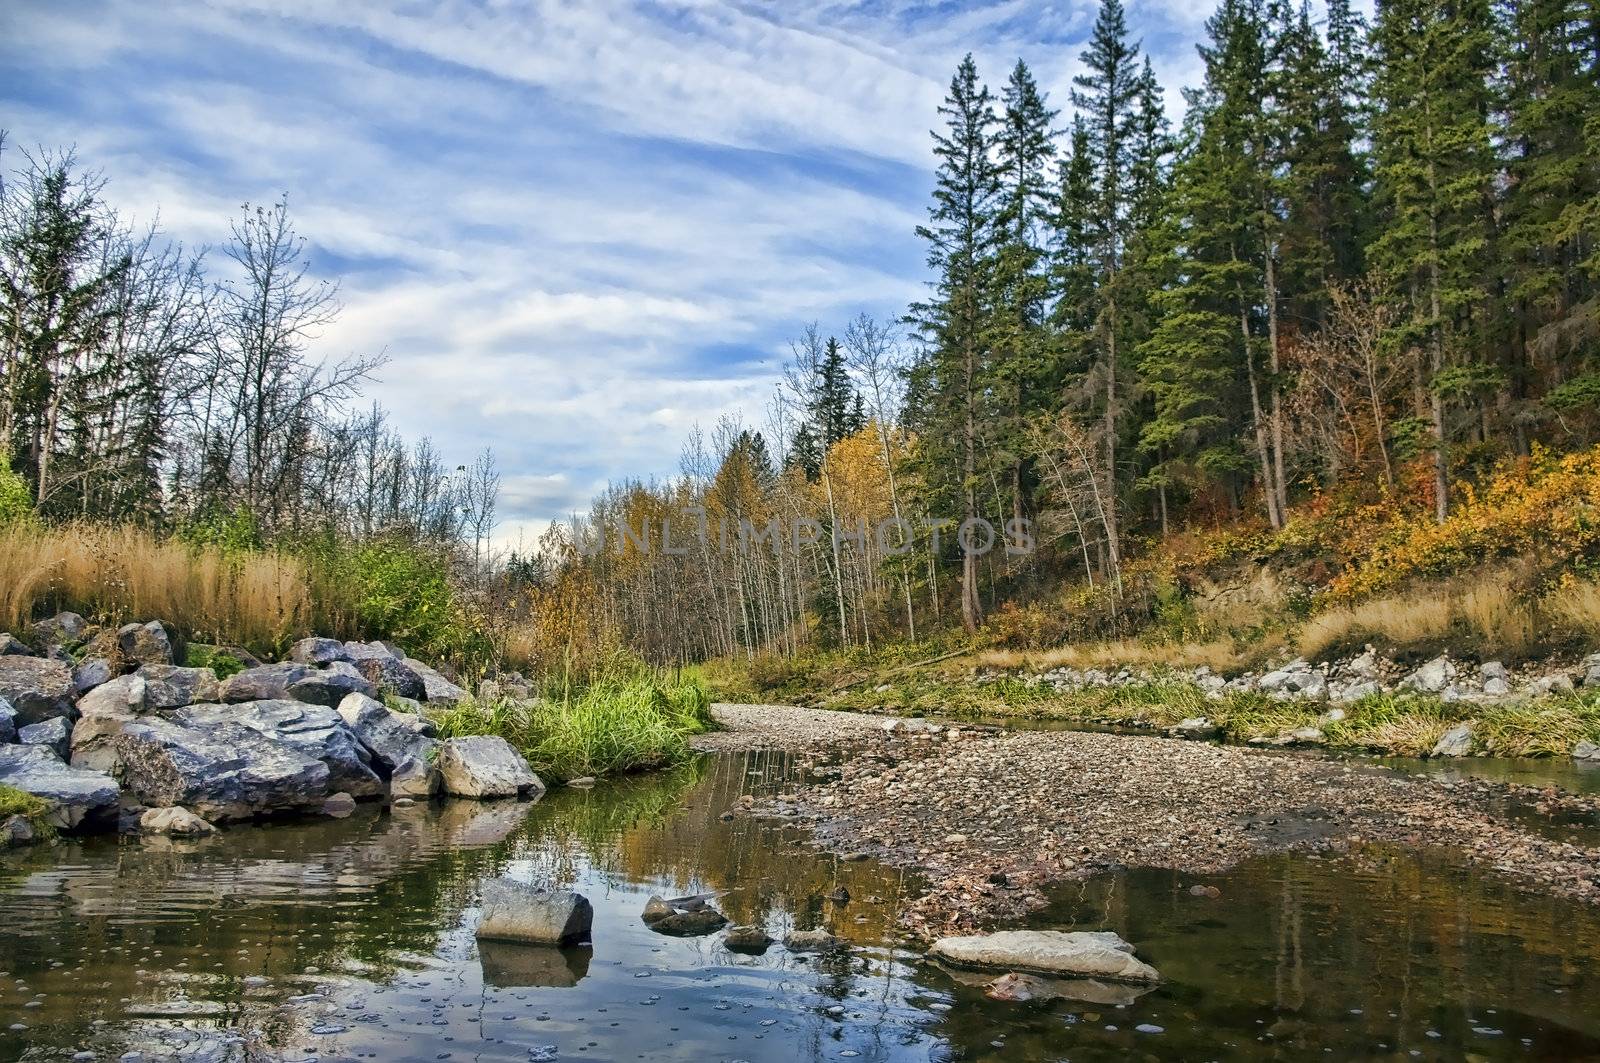 Autumn Creek and Rocky Bank by watamyr